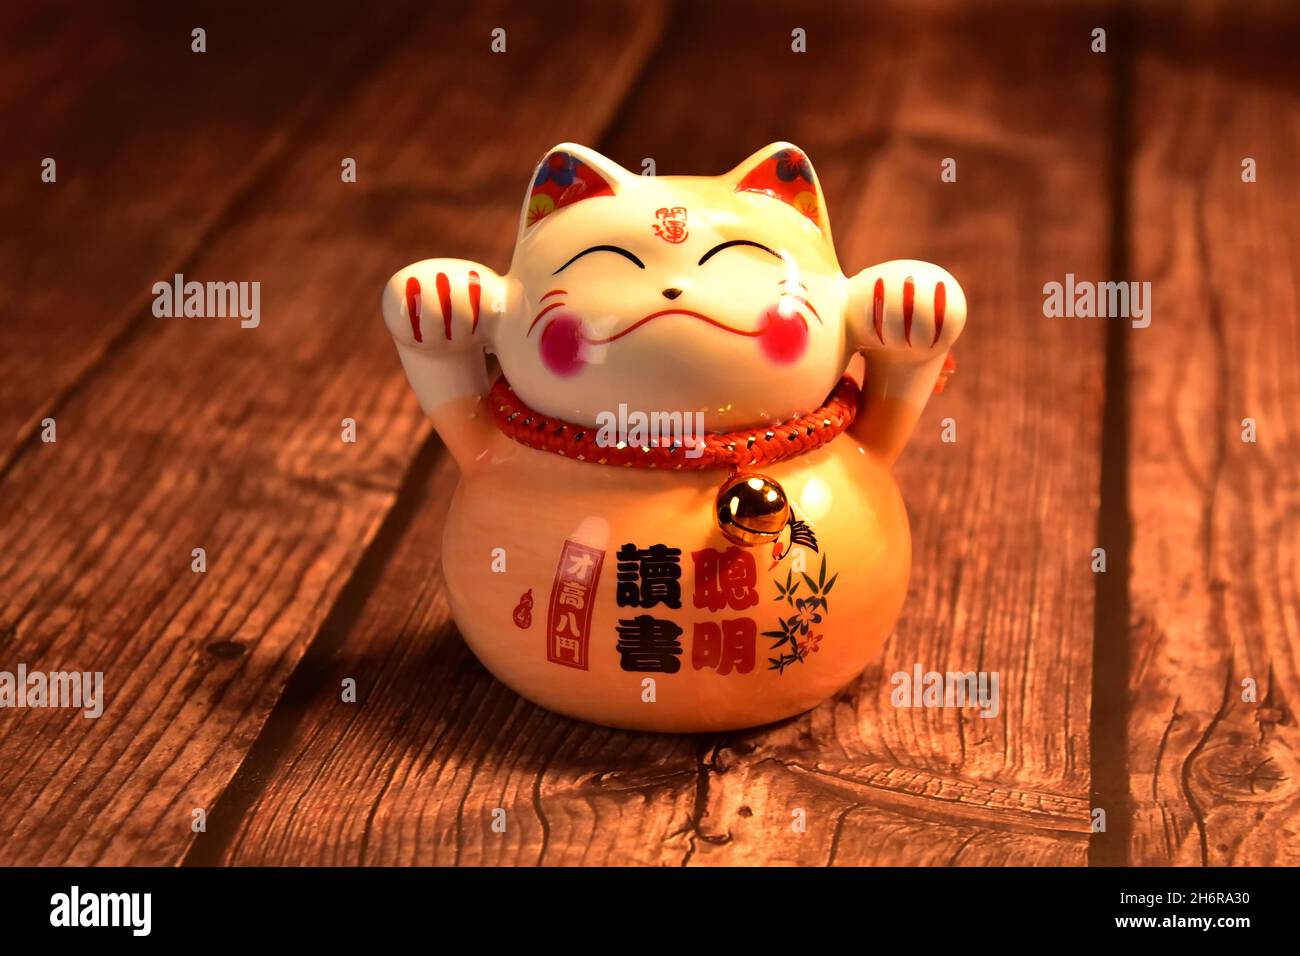 A Japanese fortune cat (maneki neko) made of porcelain on a rustic wooden table. Stock Photo